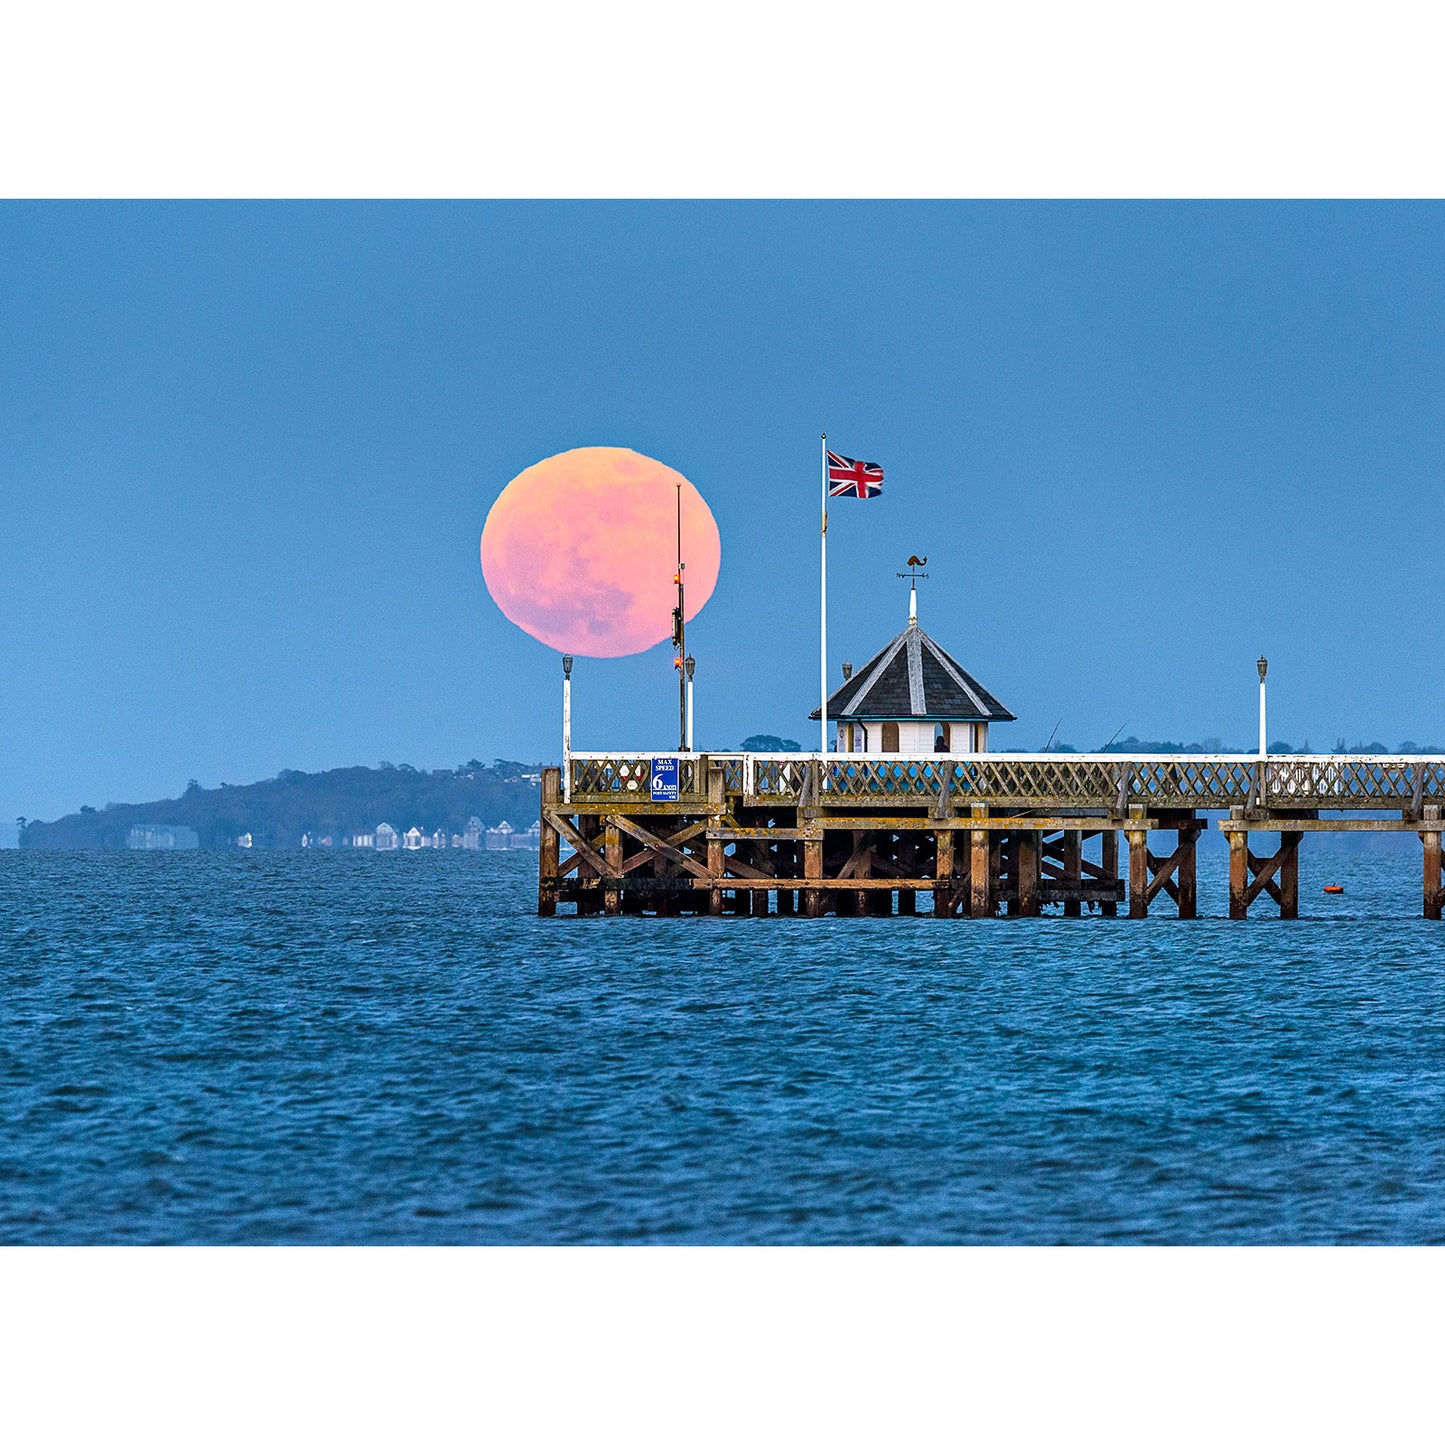 Supermoon over Yarmouth Pier - Available Light Photography